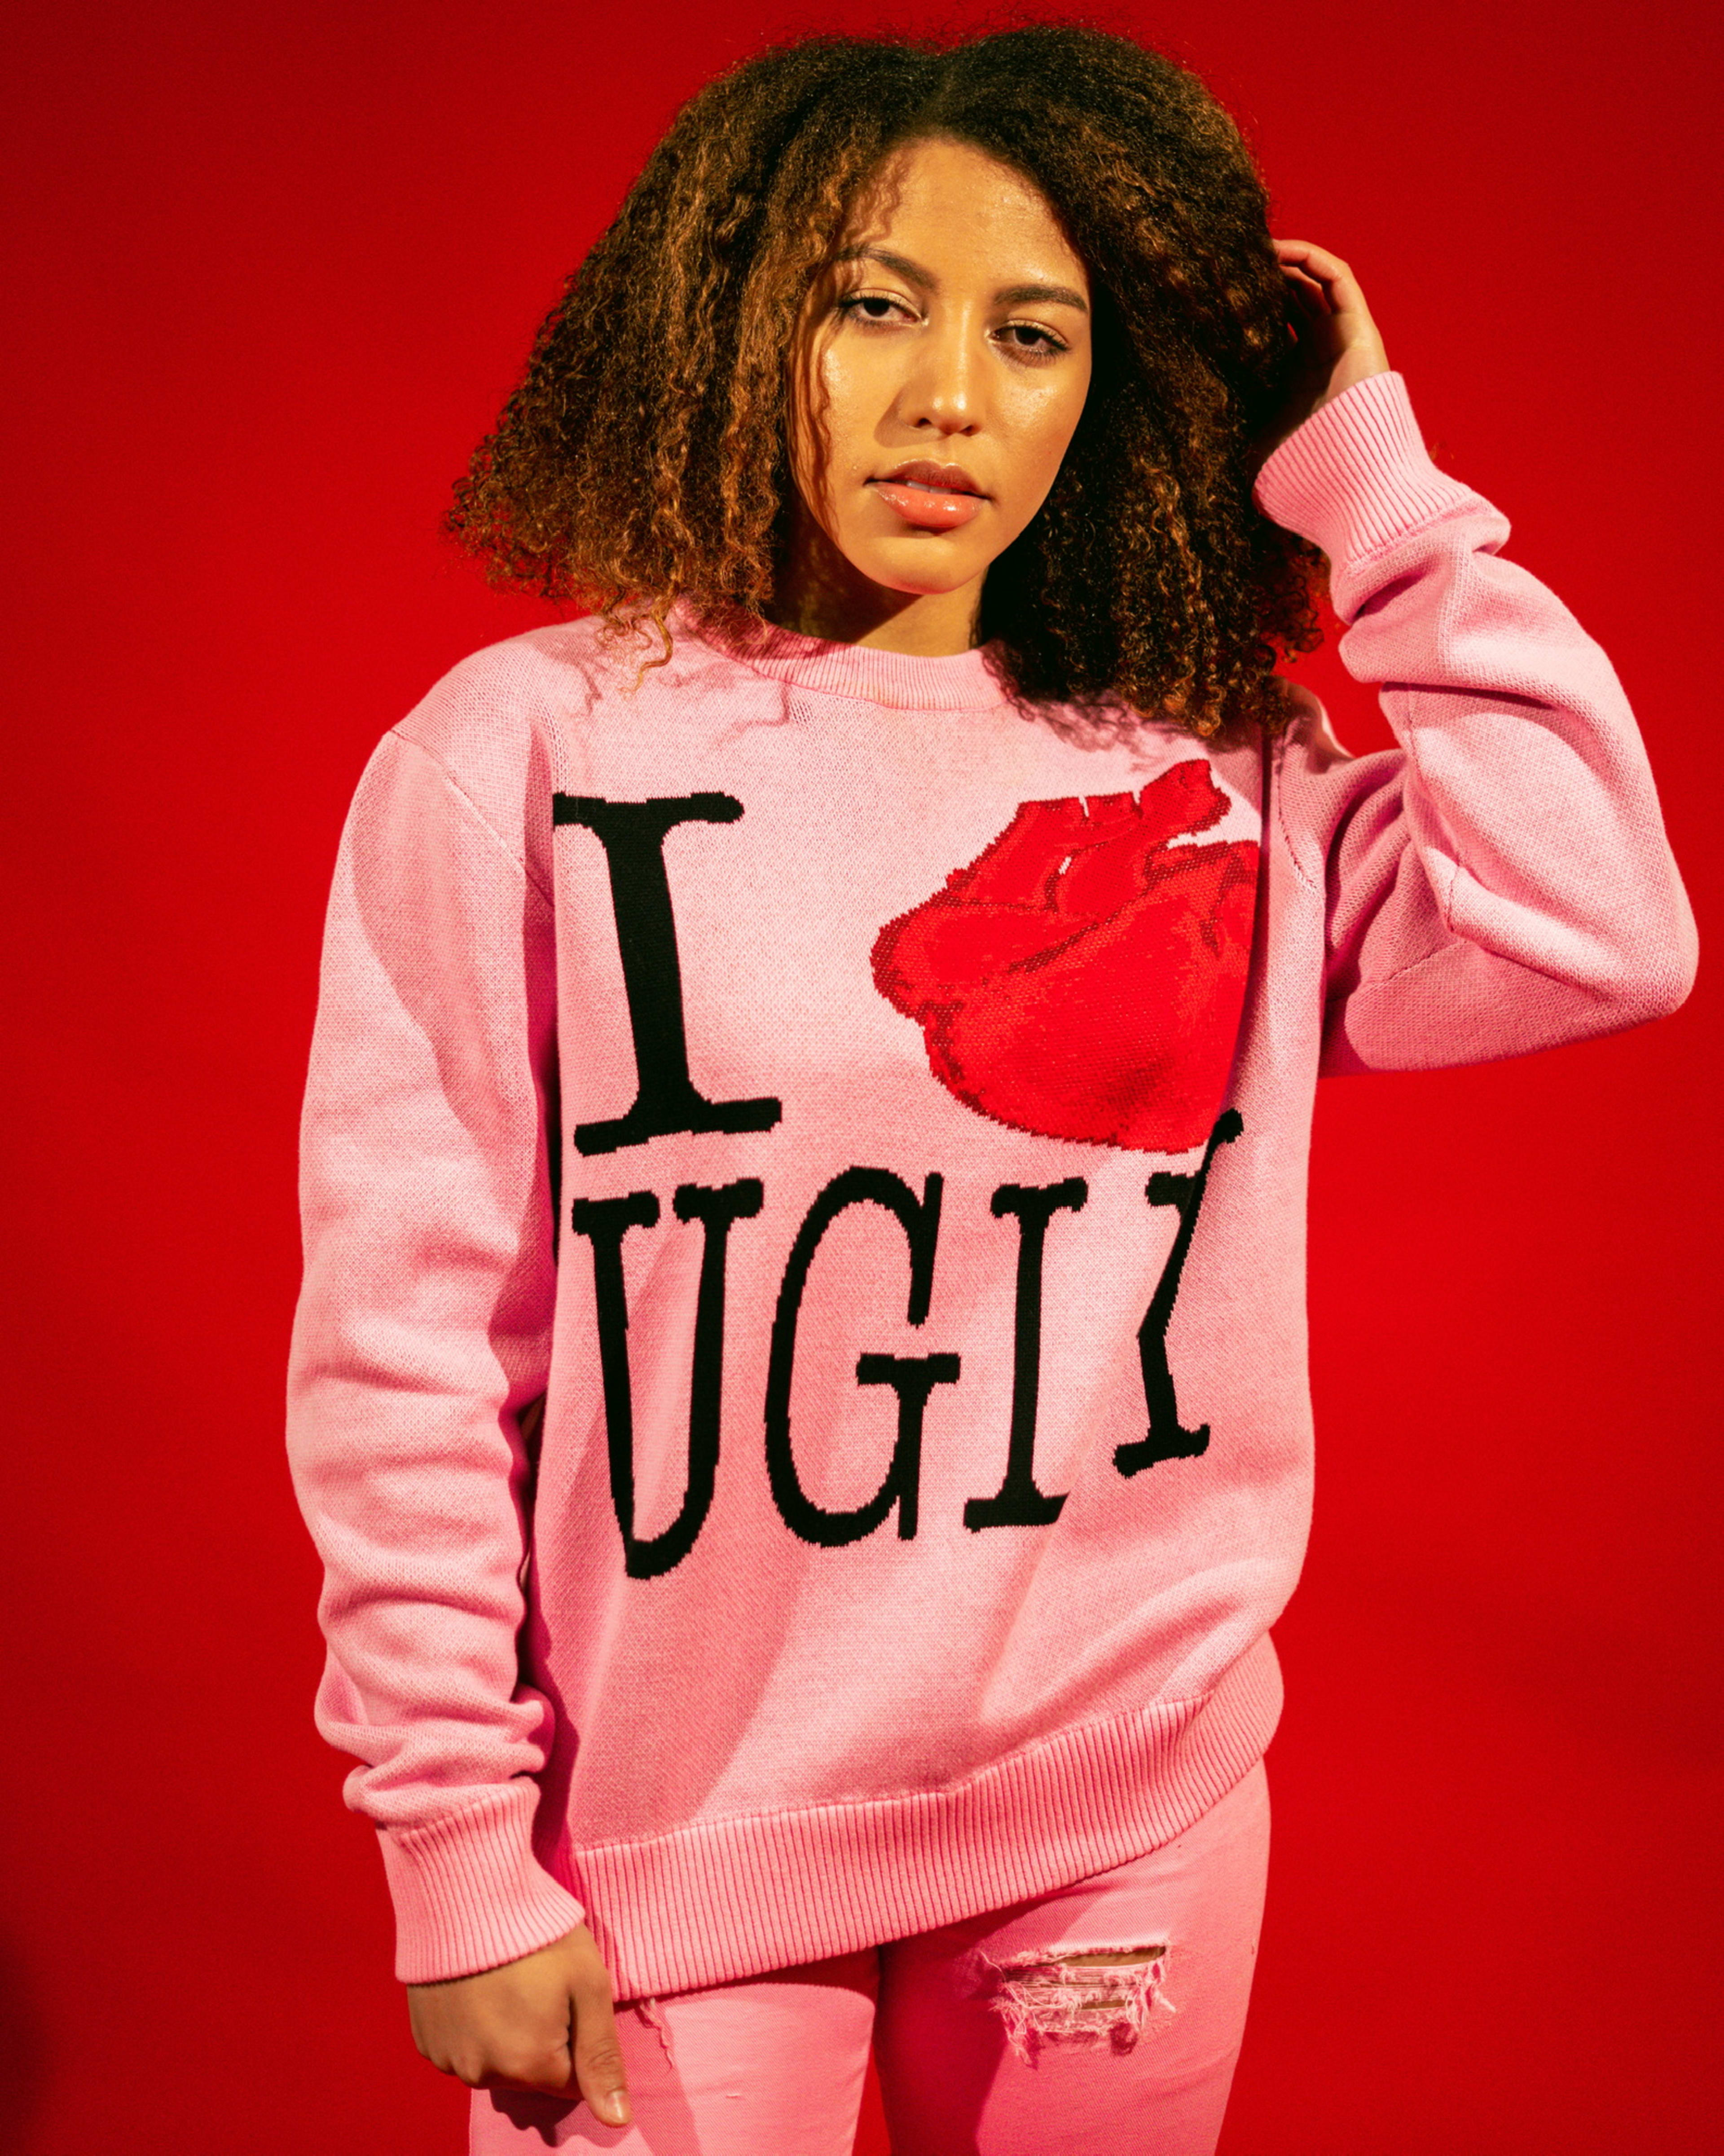 A fashion model sporting a pink sweater with a red heart for a photoshoot.